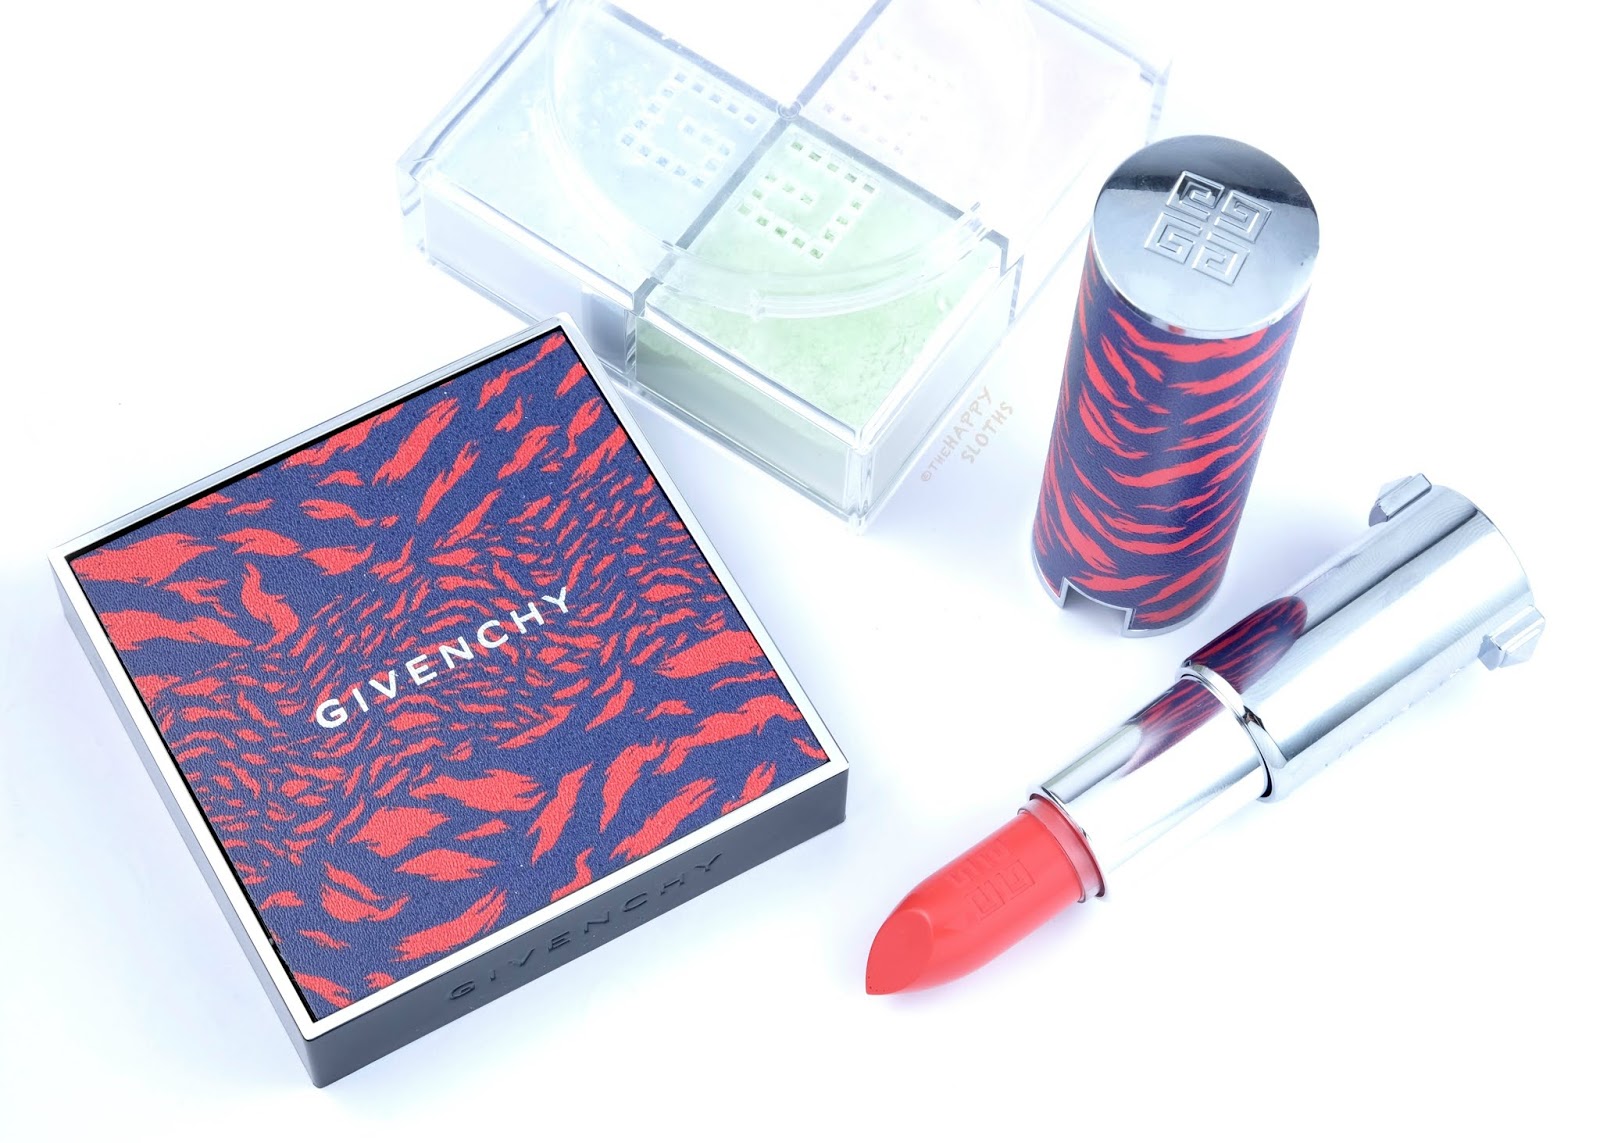 Givenchy | Couture Edition 2019 Prisme Libre & Le Rouge Lipstick: Review and Swatches